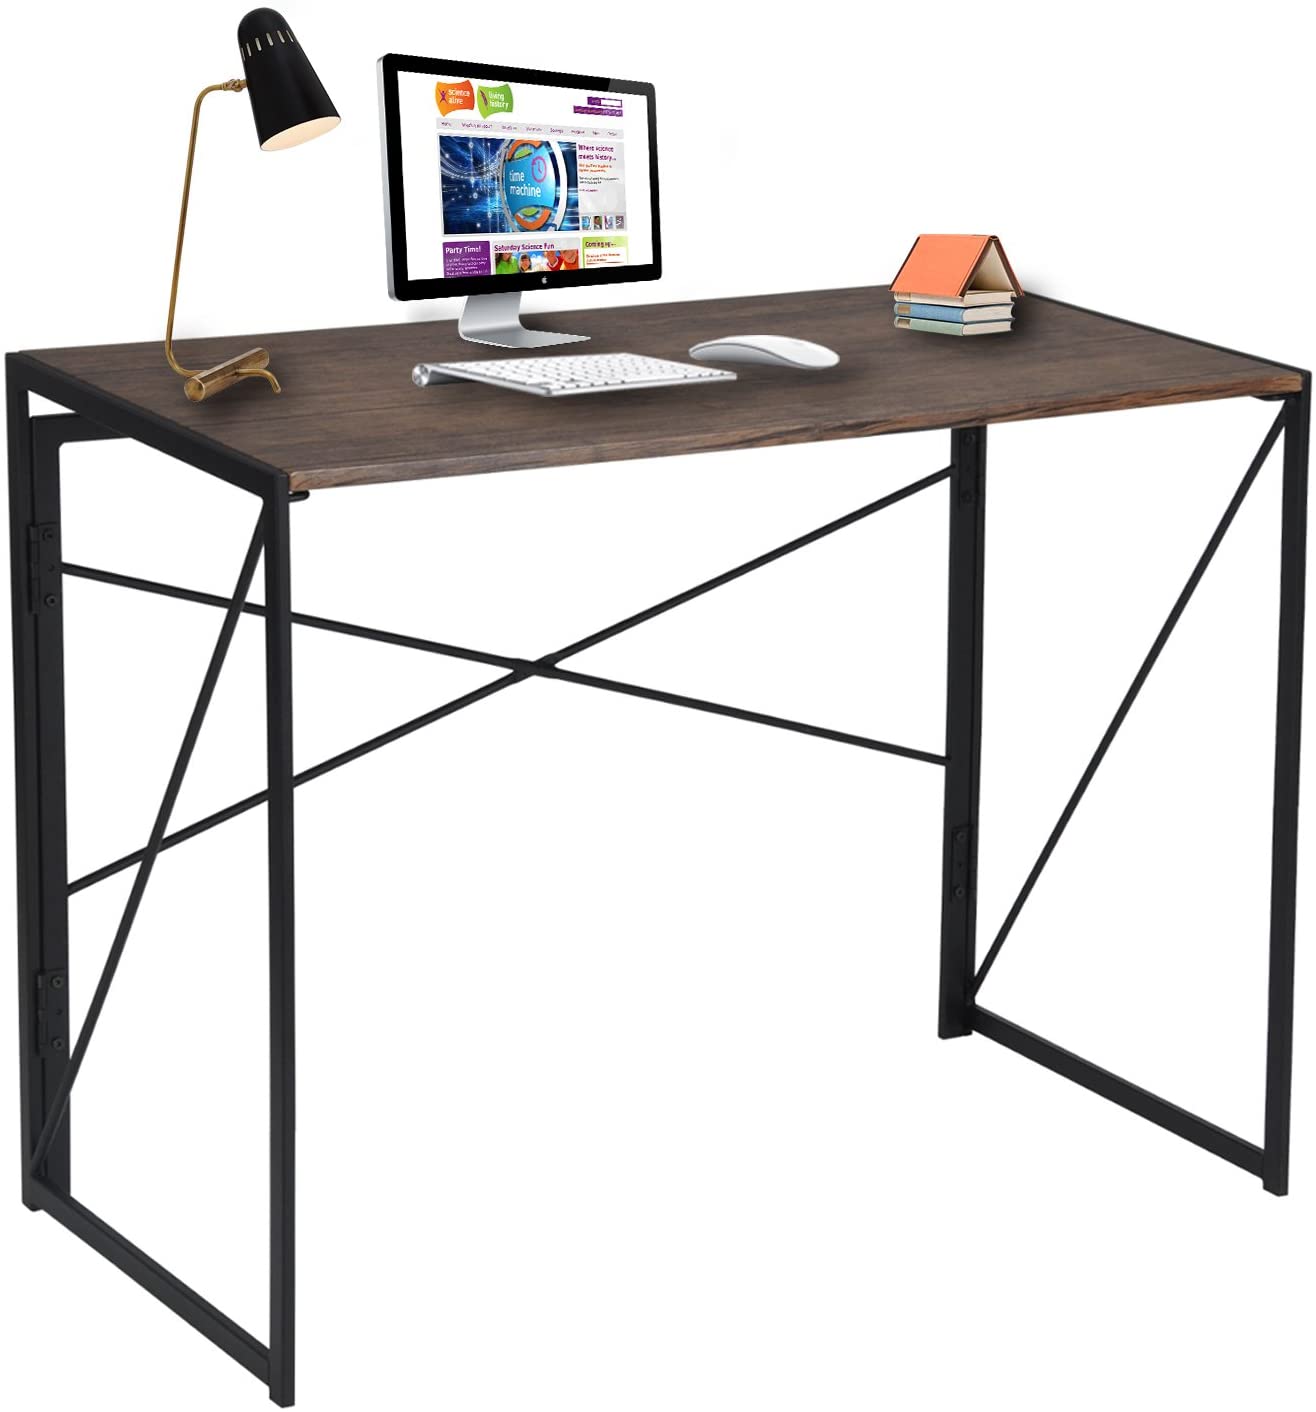 a folding portable desk for a home office